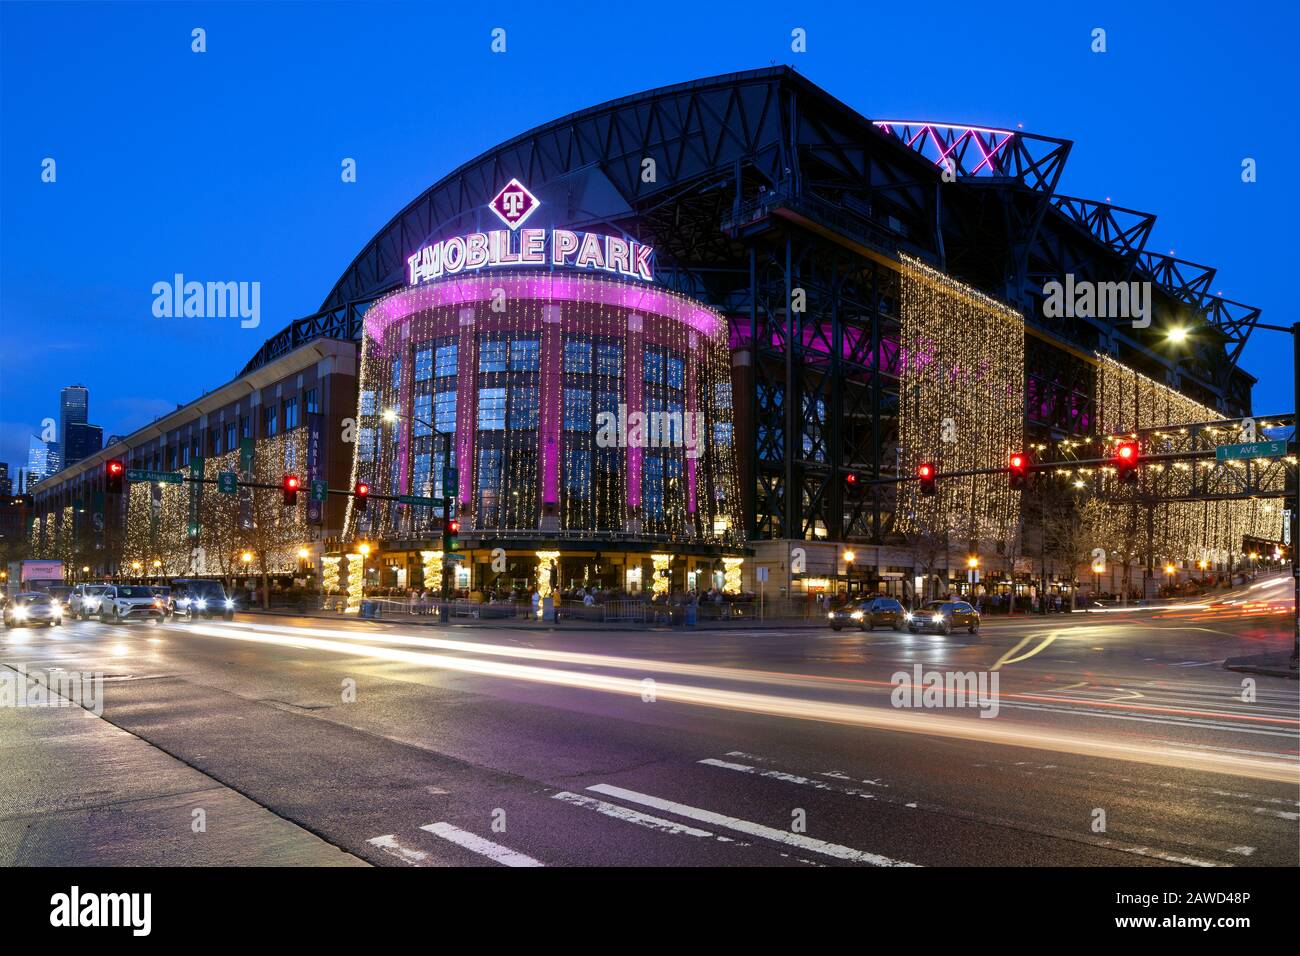 Mariners stadium hi-res stock photography and images - Alamy